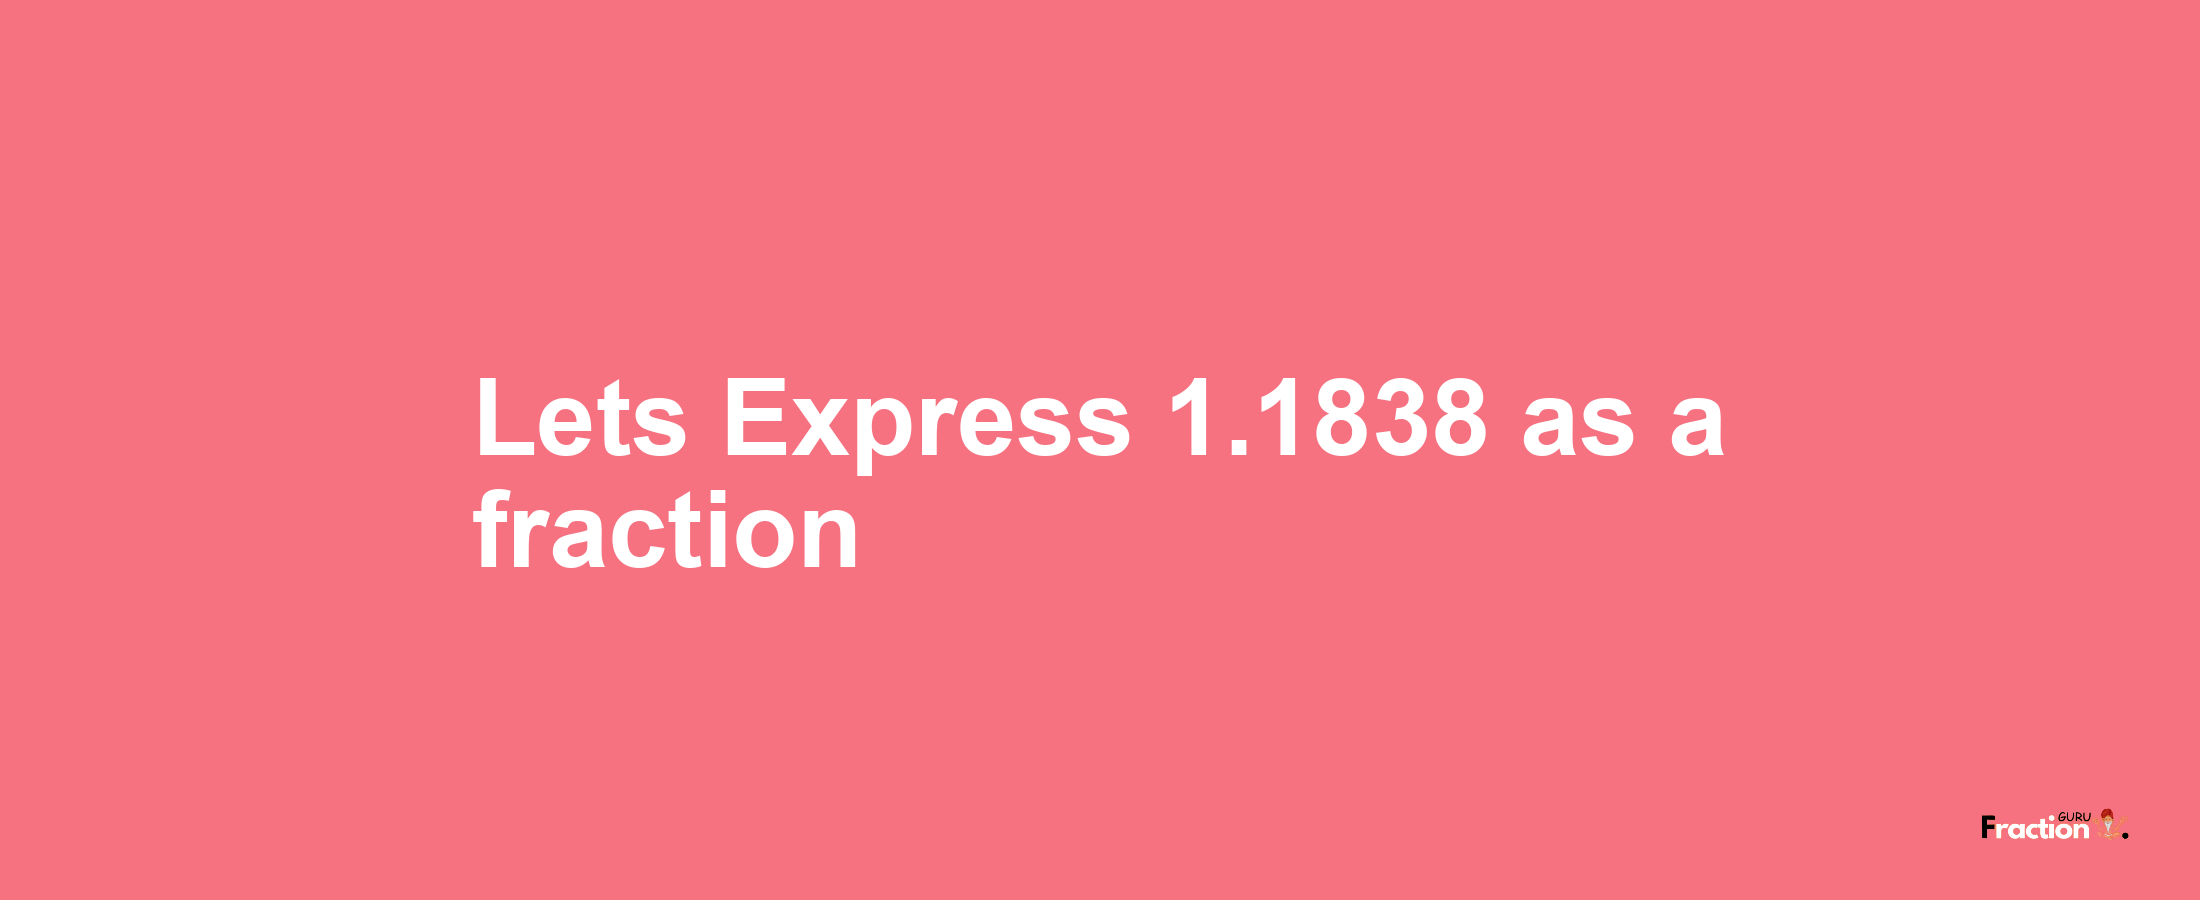 Lets Express 1.1838 as afraction